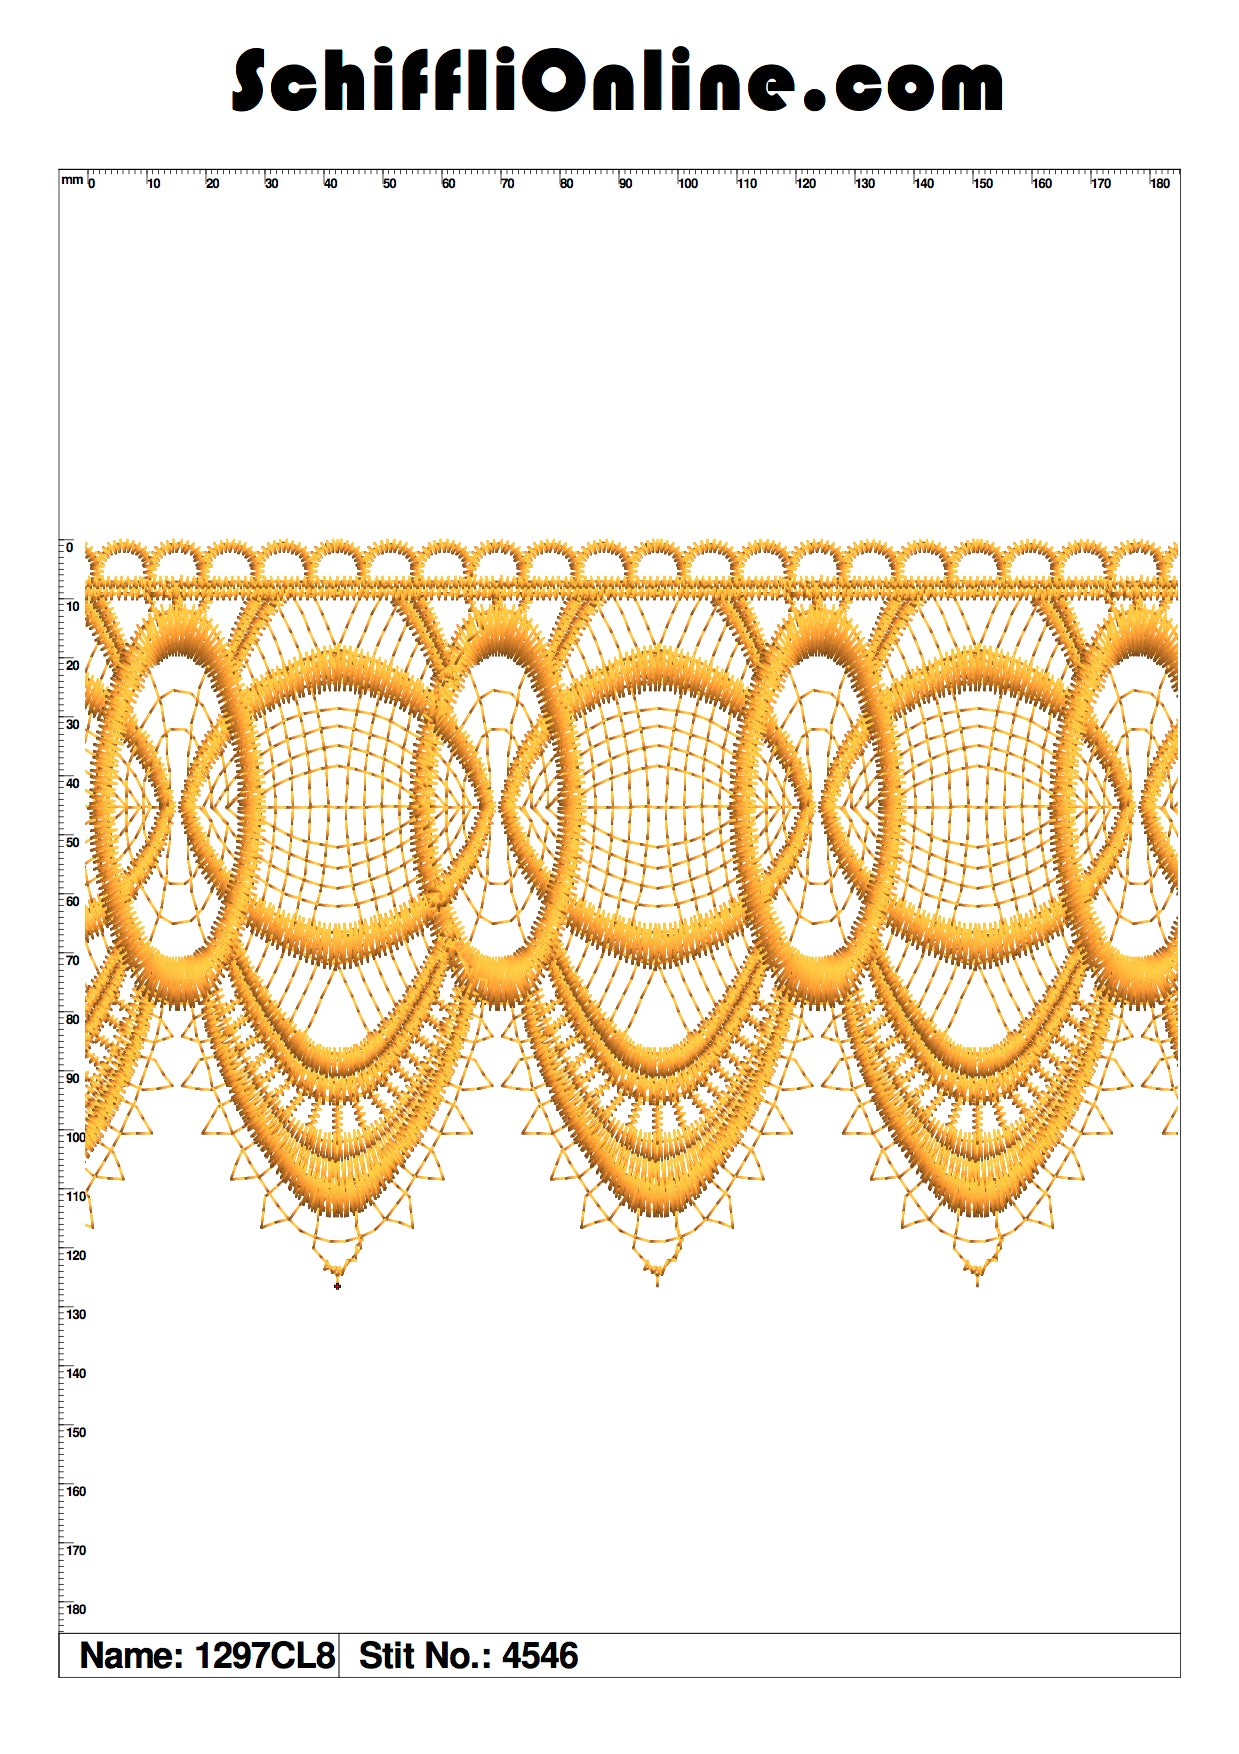 Book 142 CHEMICAL LACE 8X4 50 DESIGNS